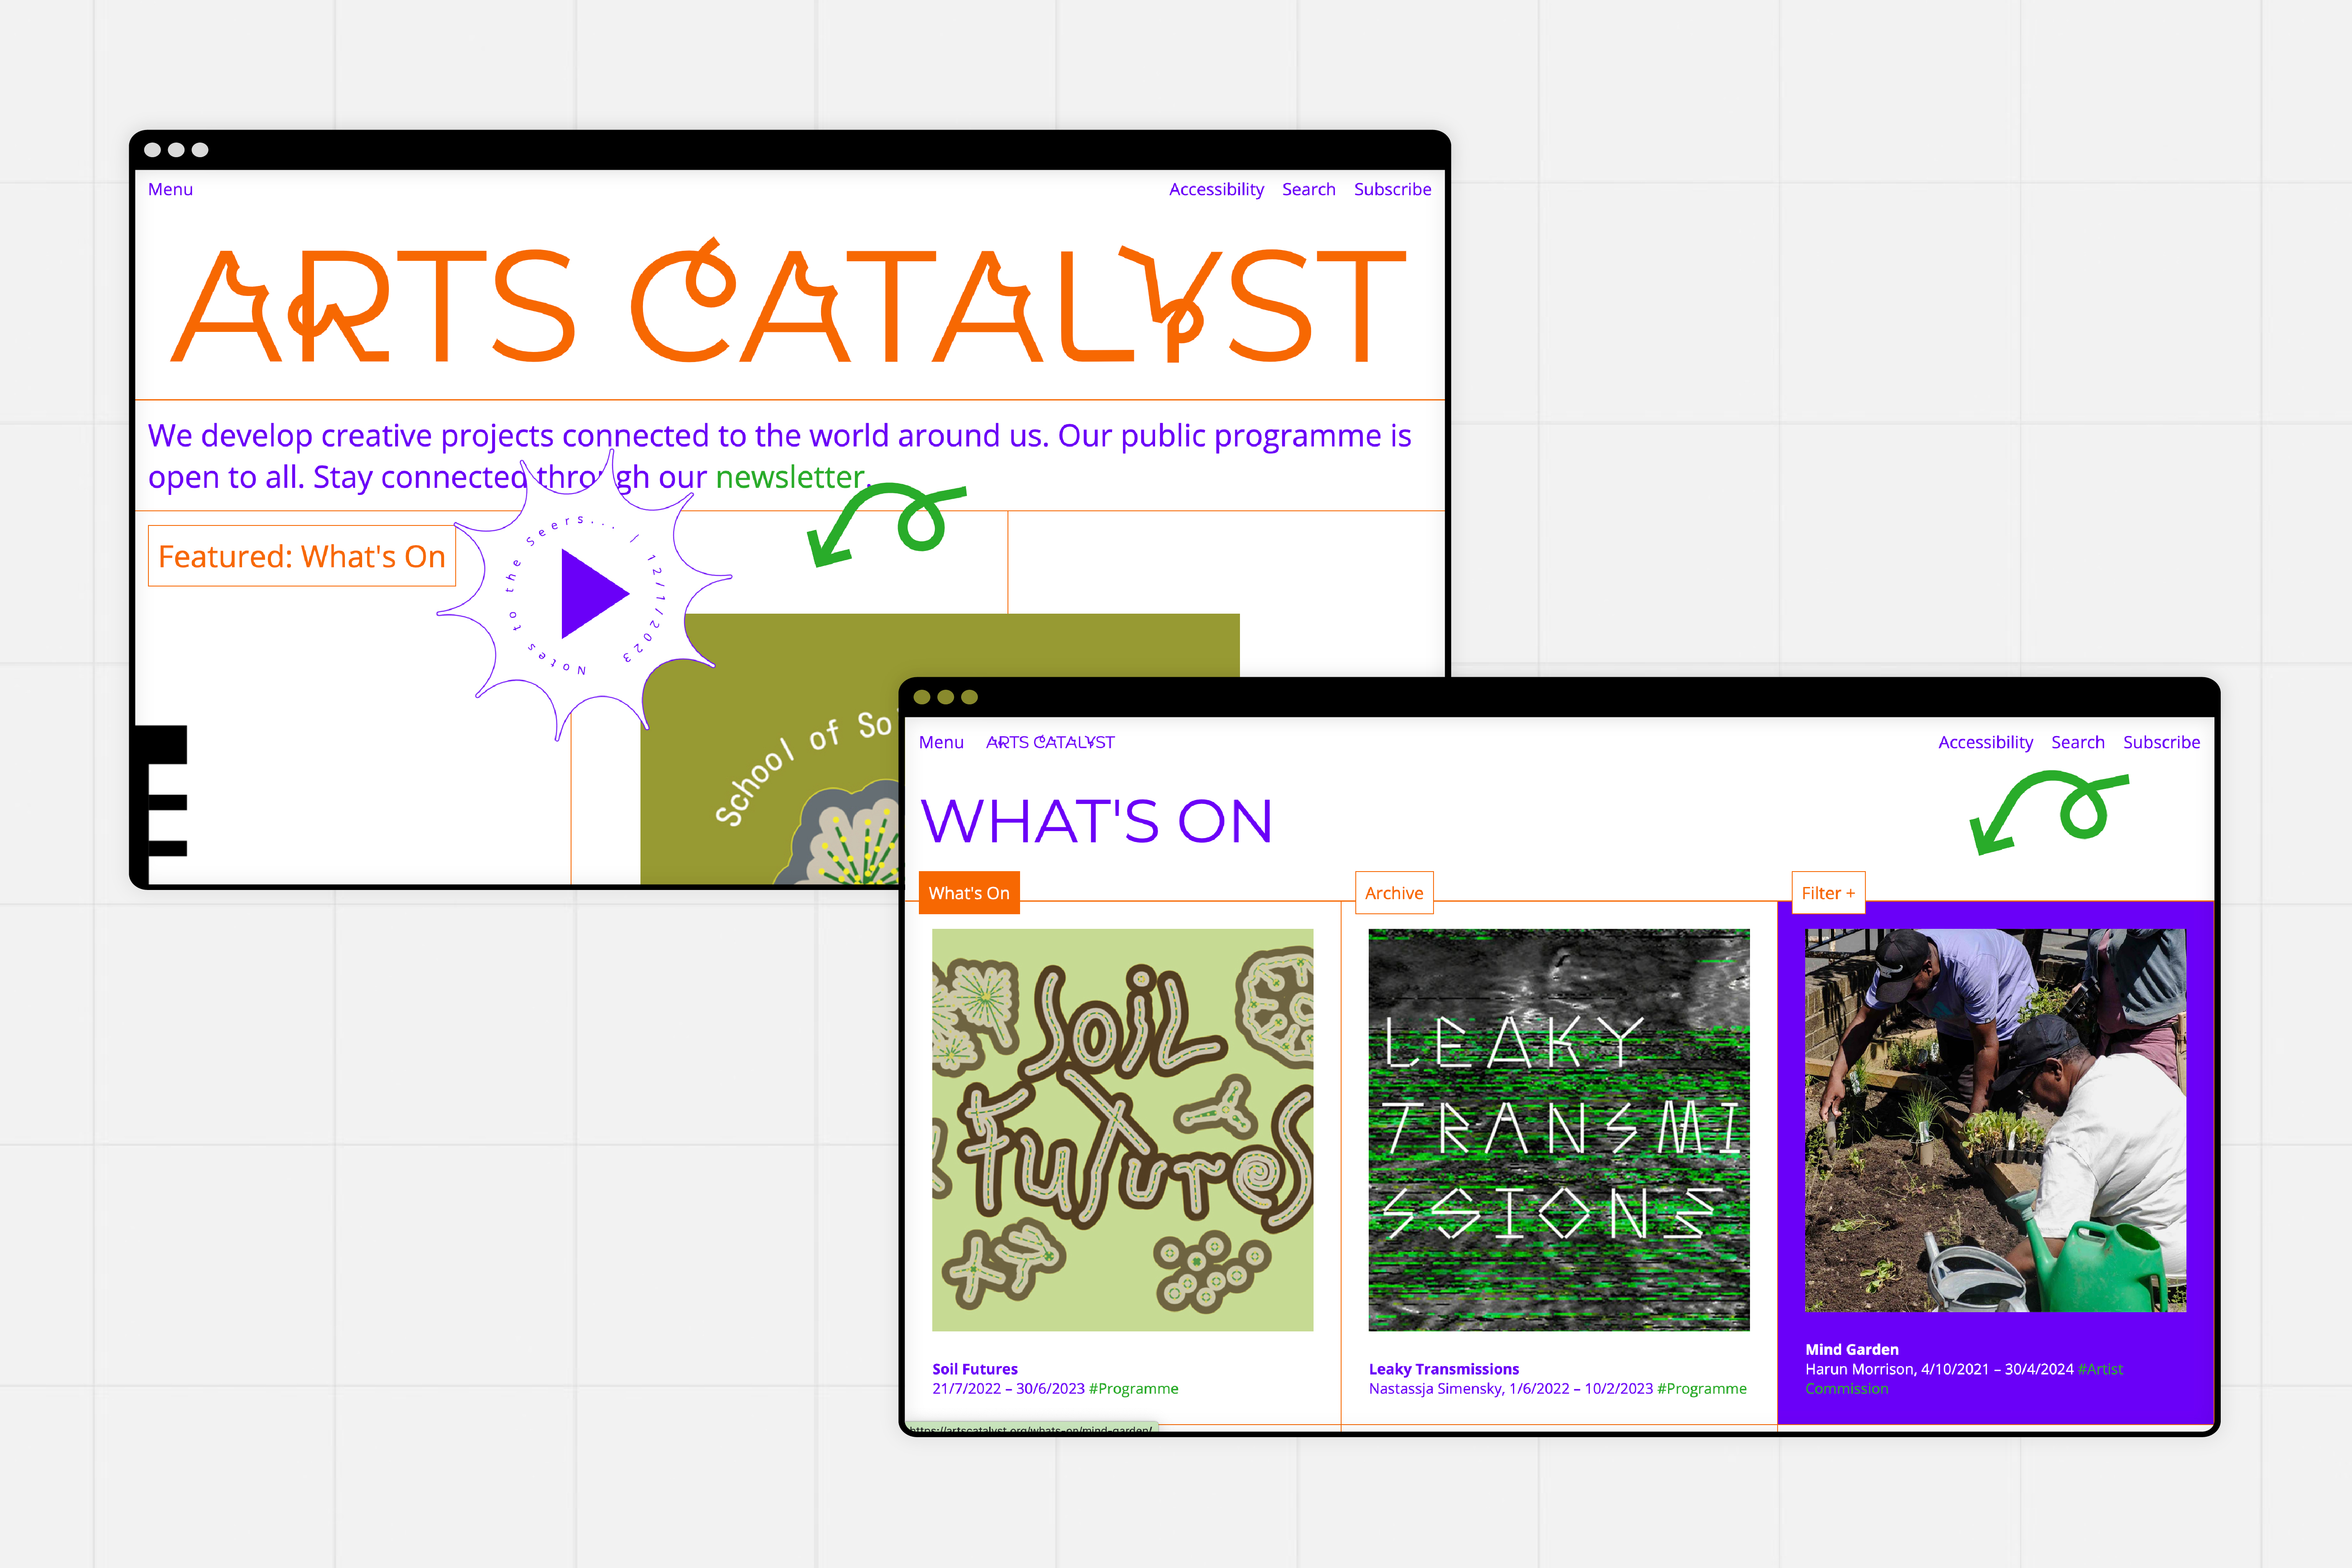 two desktops with displaying the arts catalyst website, one desktop shows the homepage and the other shows the what's on page